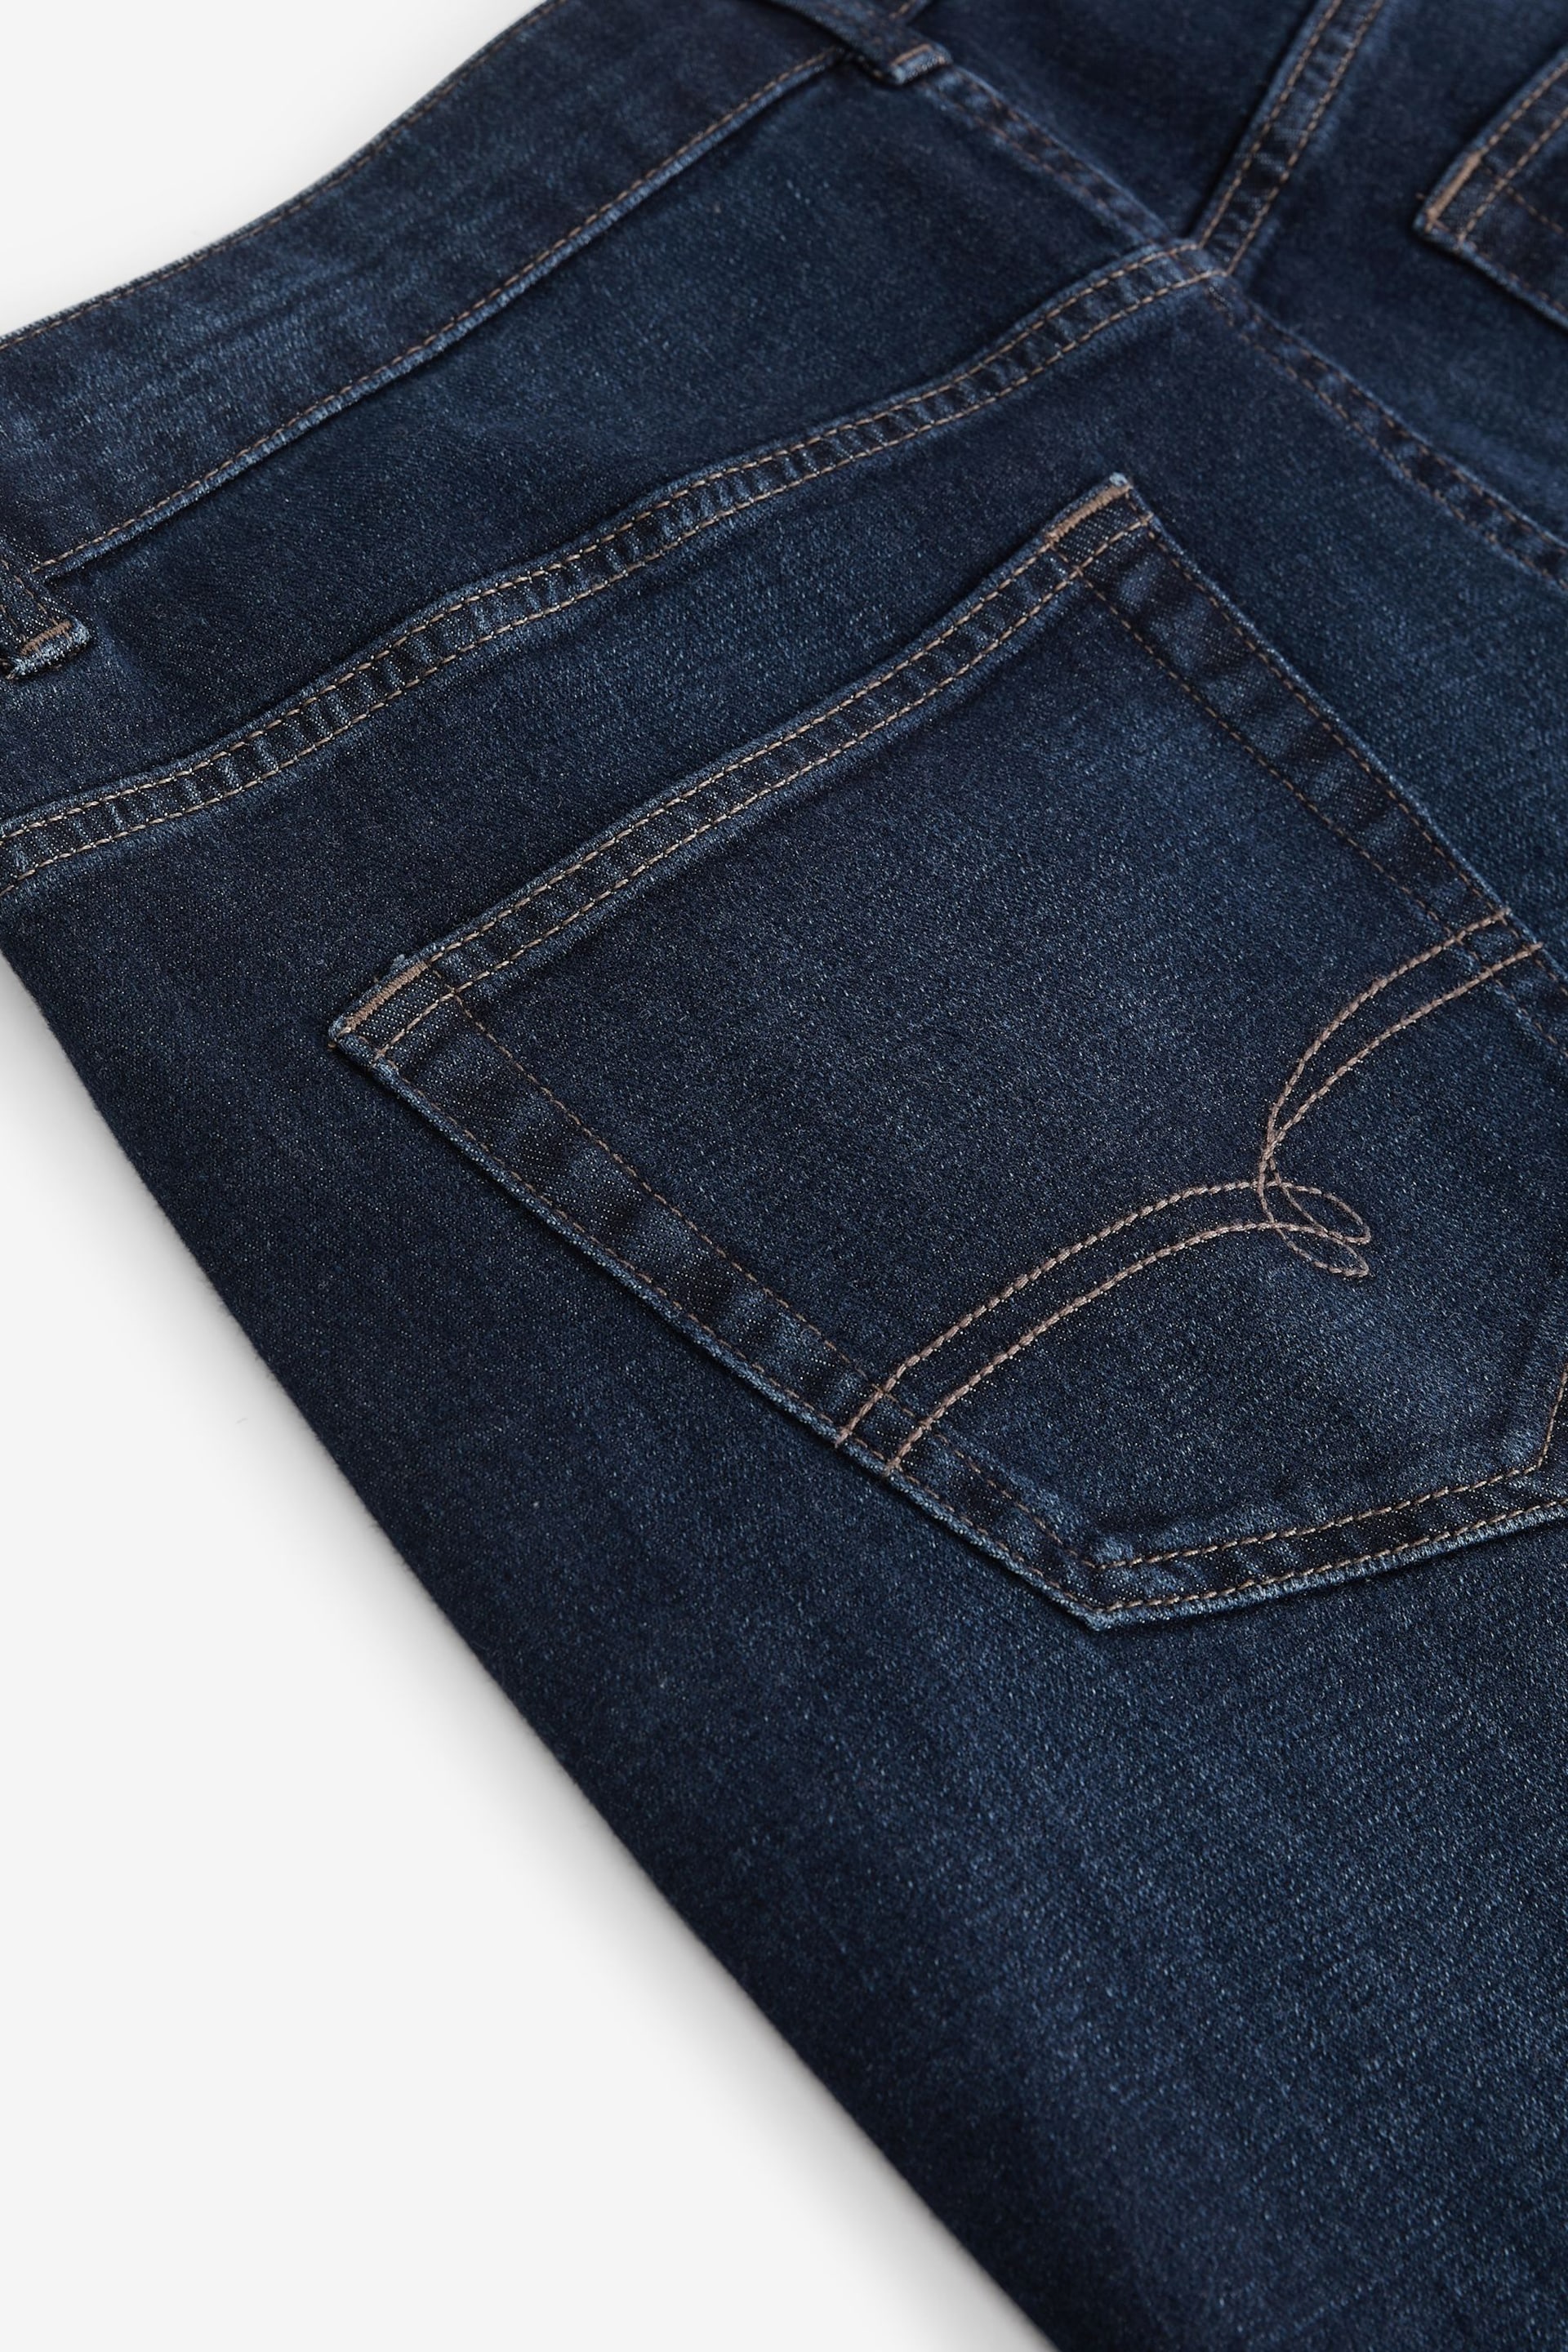 Blue Summerweight Jeans - Image 11 of 12